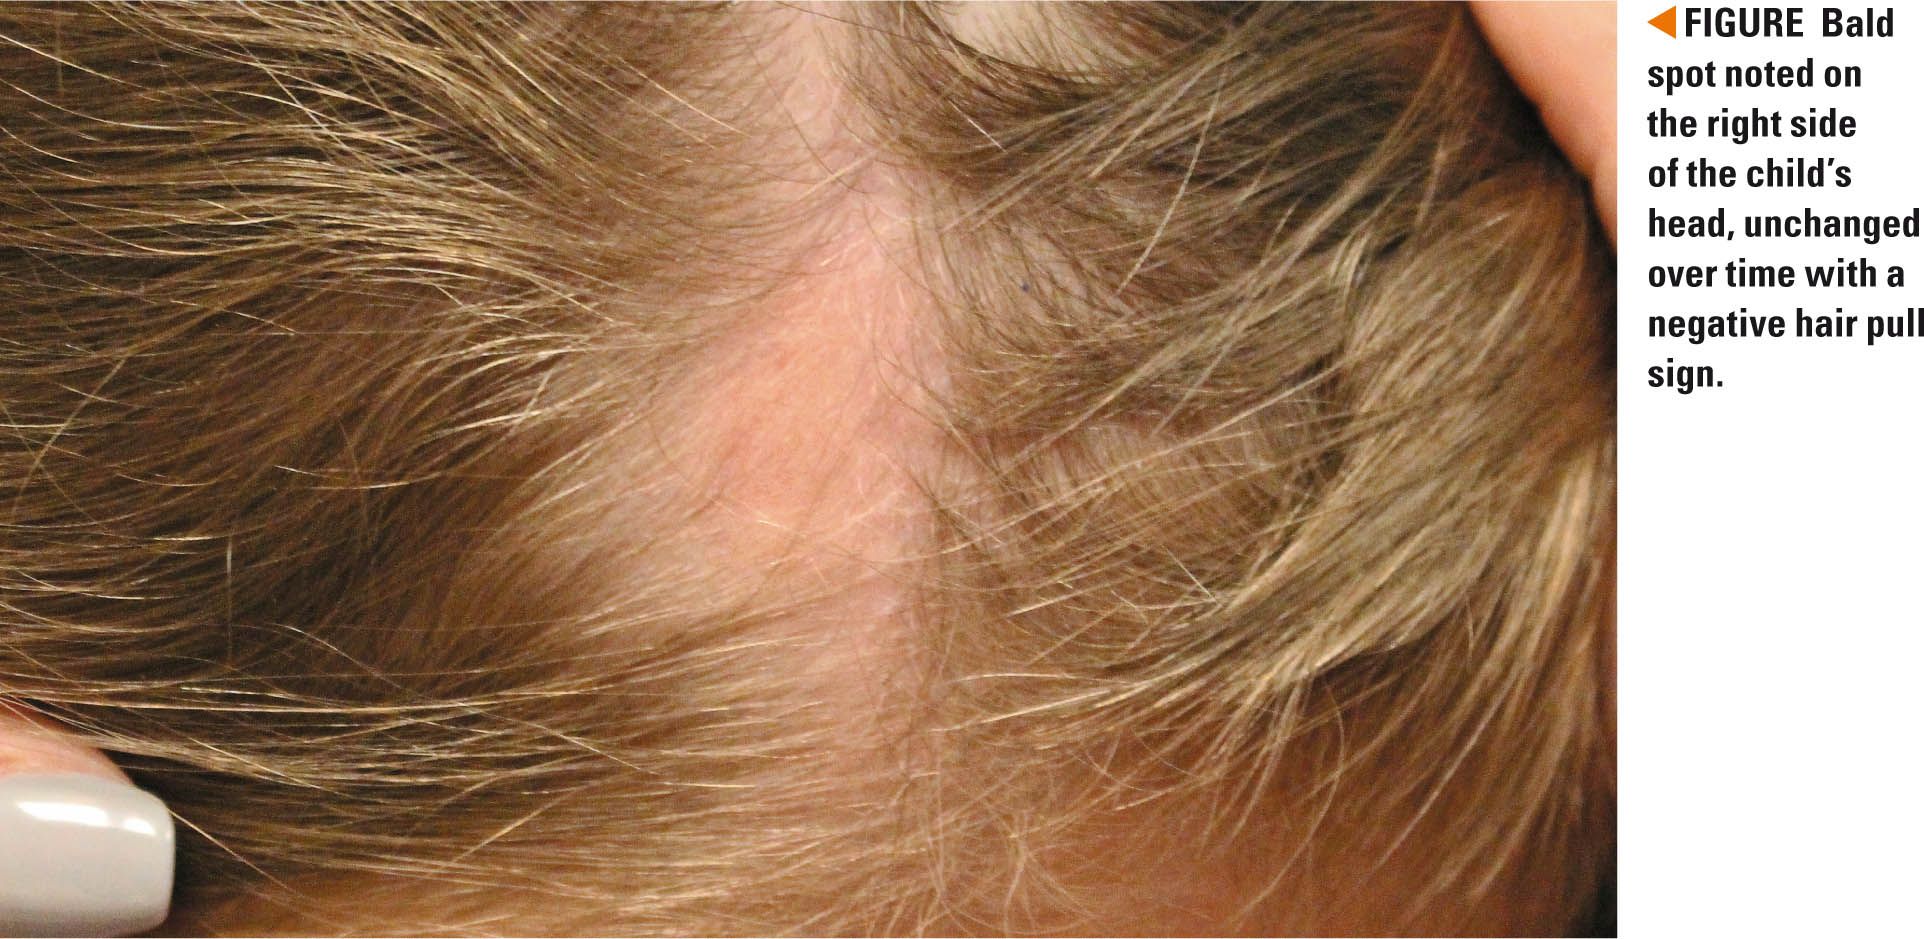 Curious bald spot on a young girl's head